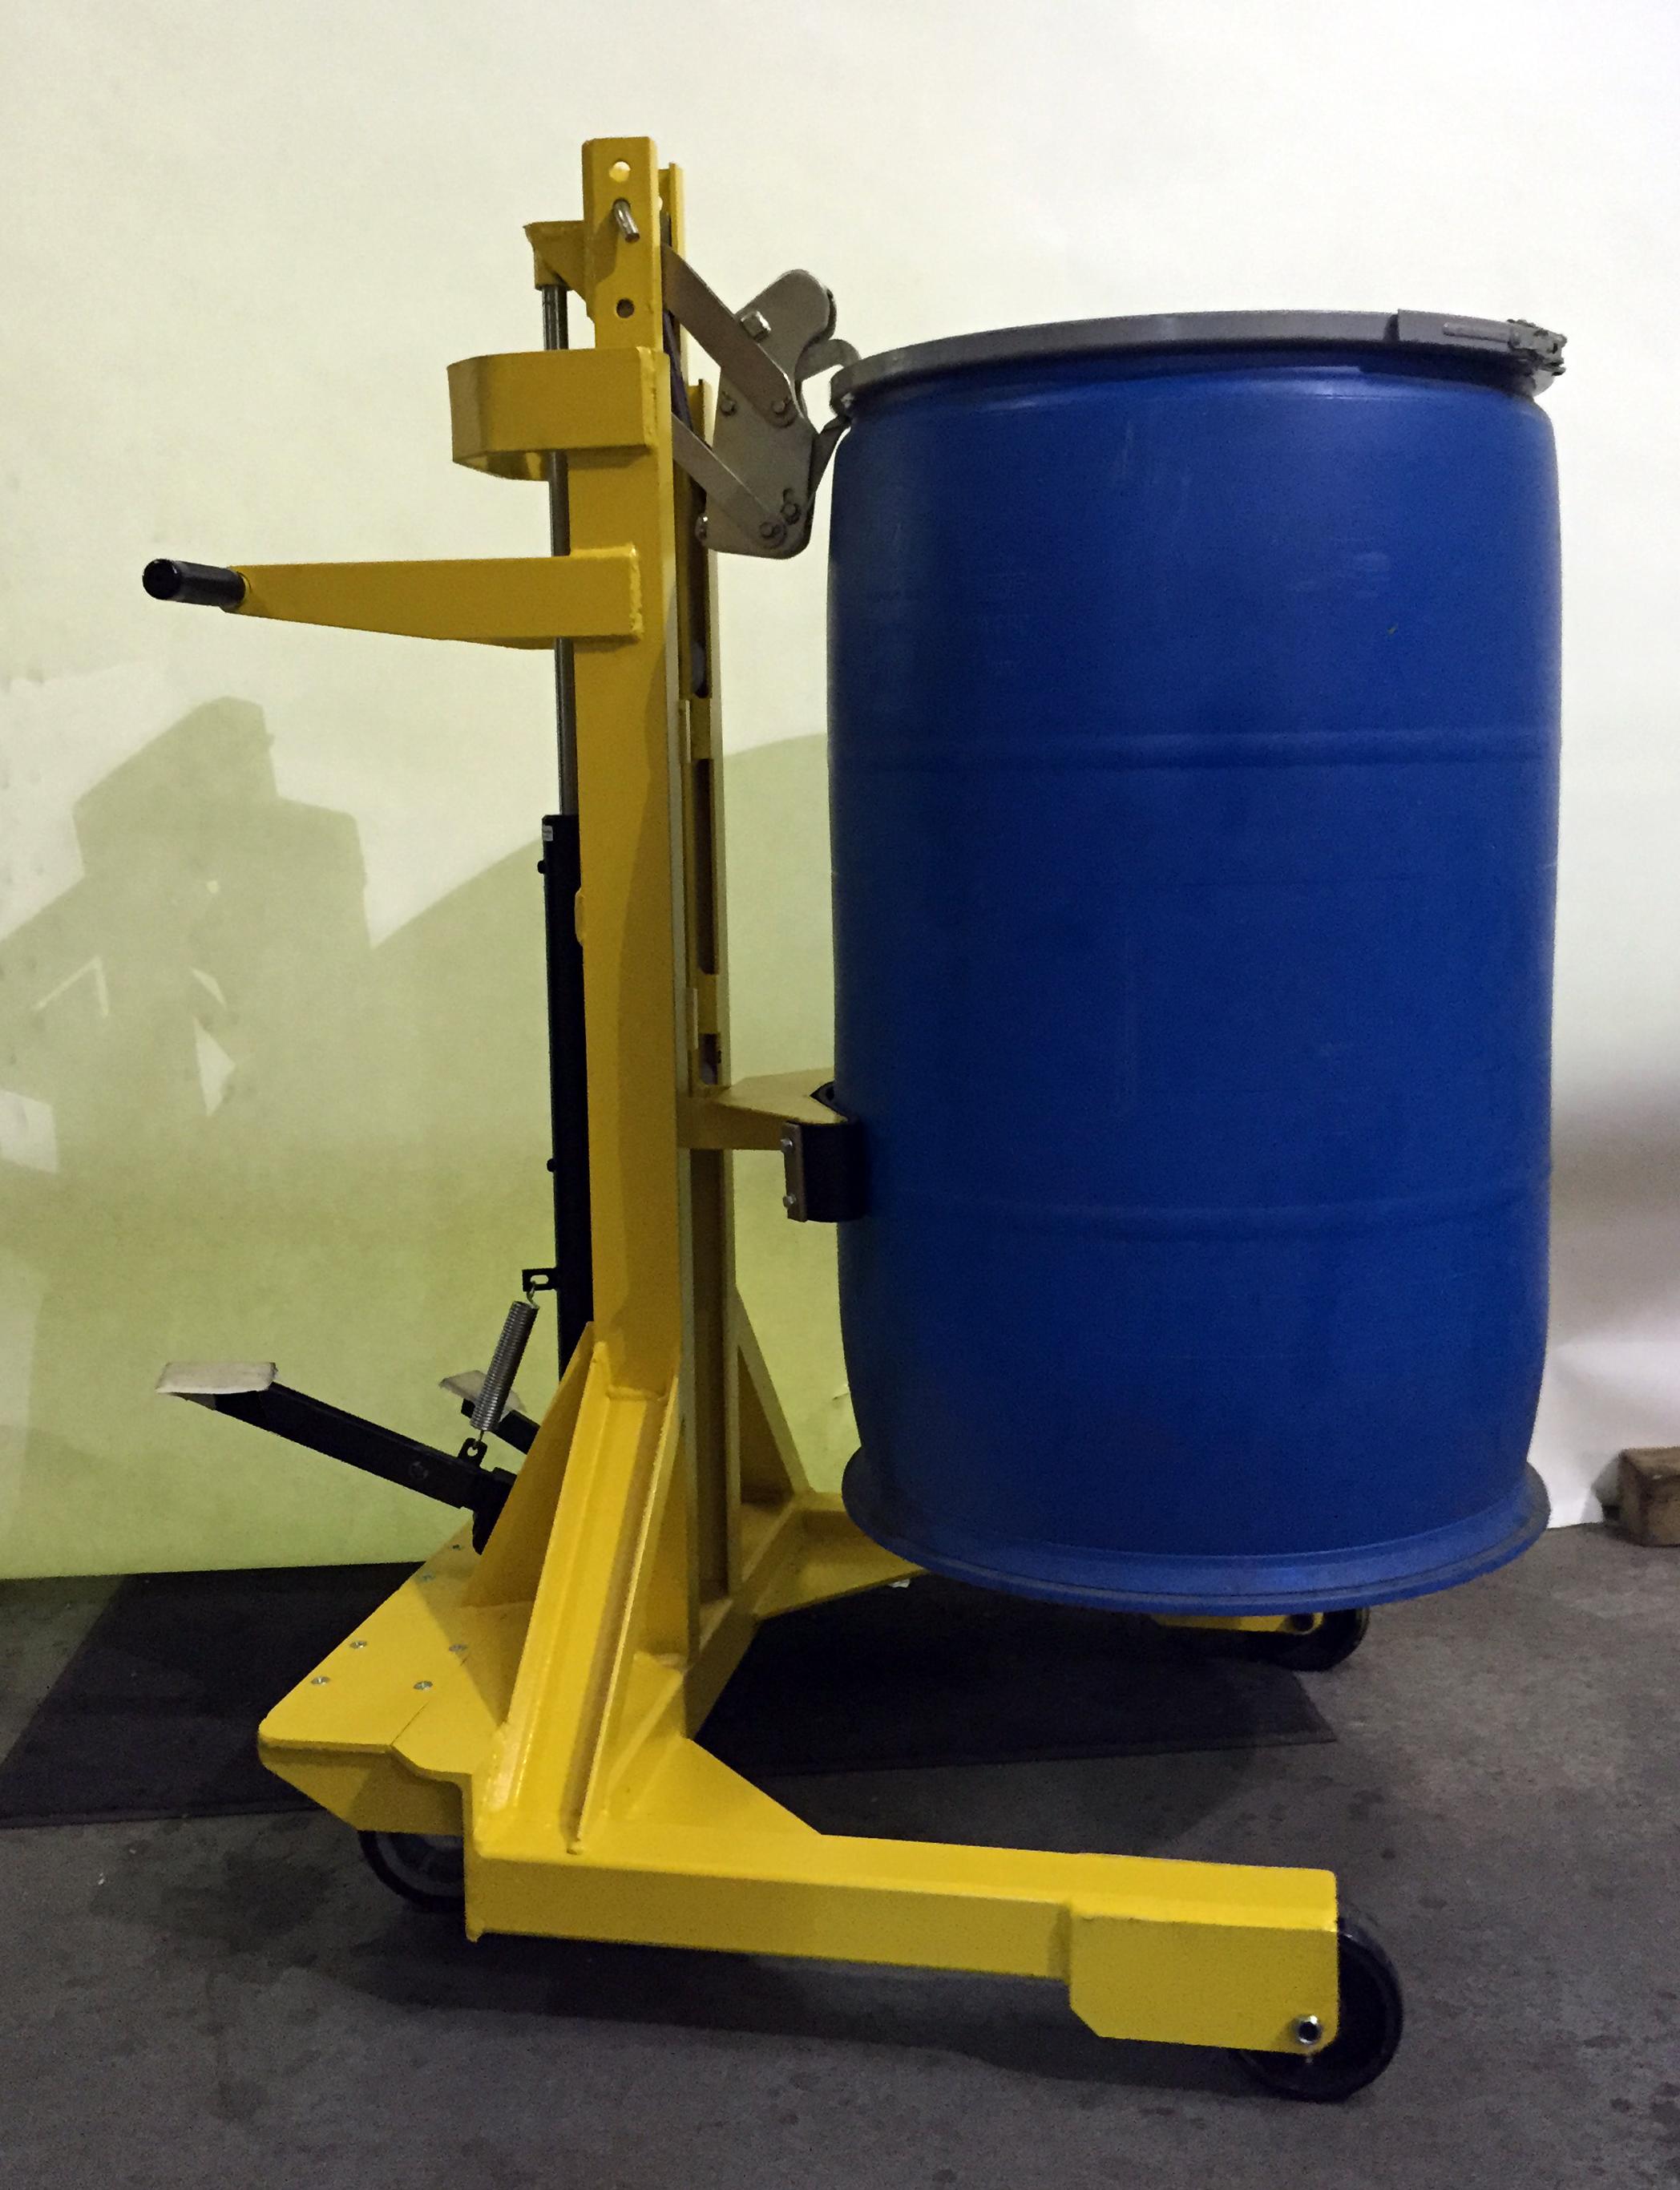 Drum Transporter, 1500 lbs. Capacity, 38 x 32 x 48 Inch Size